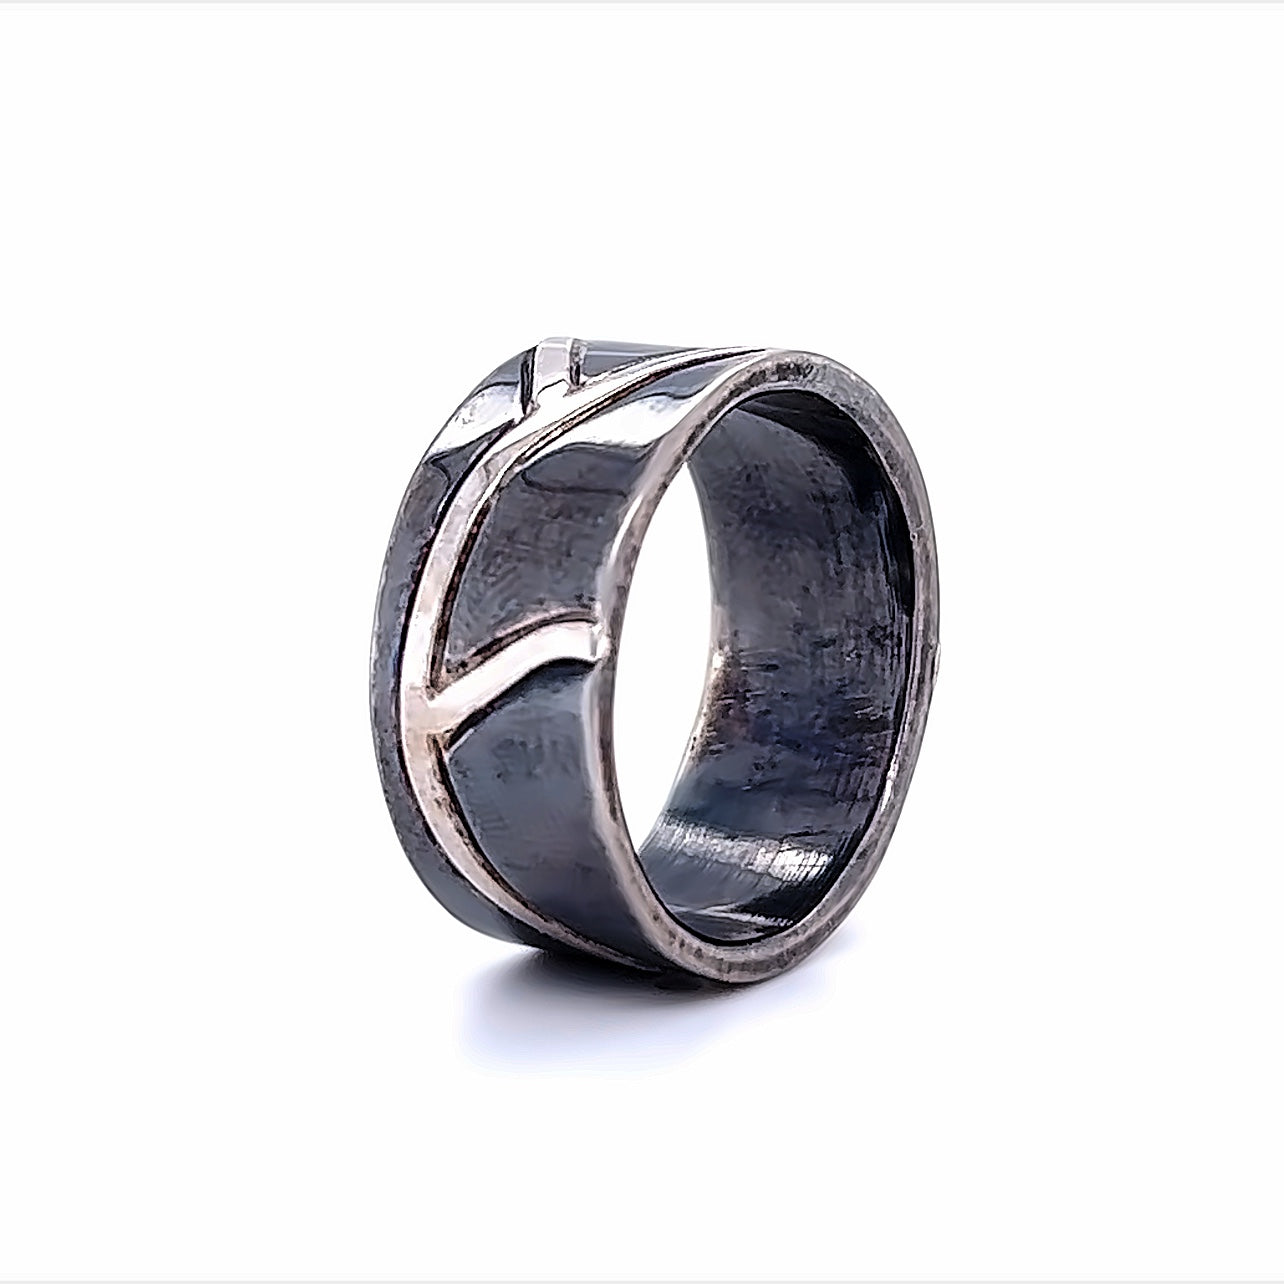 Oxidized Sterling Silver and 14k White Gold Men's Pathways Band by Paul Richter